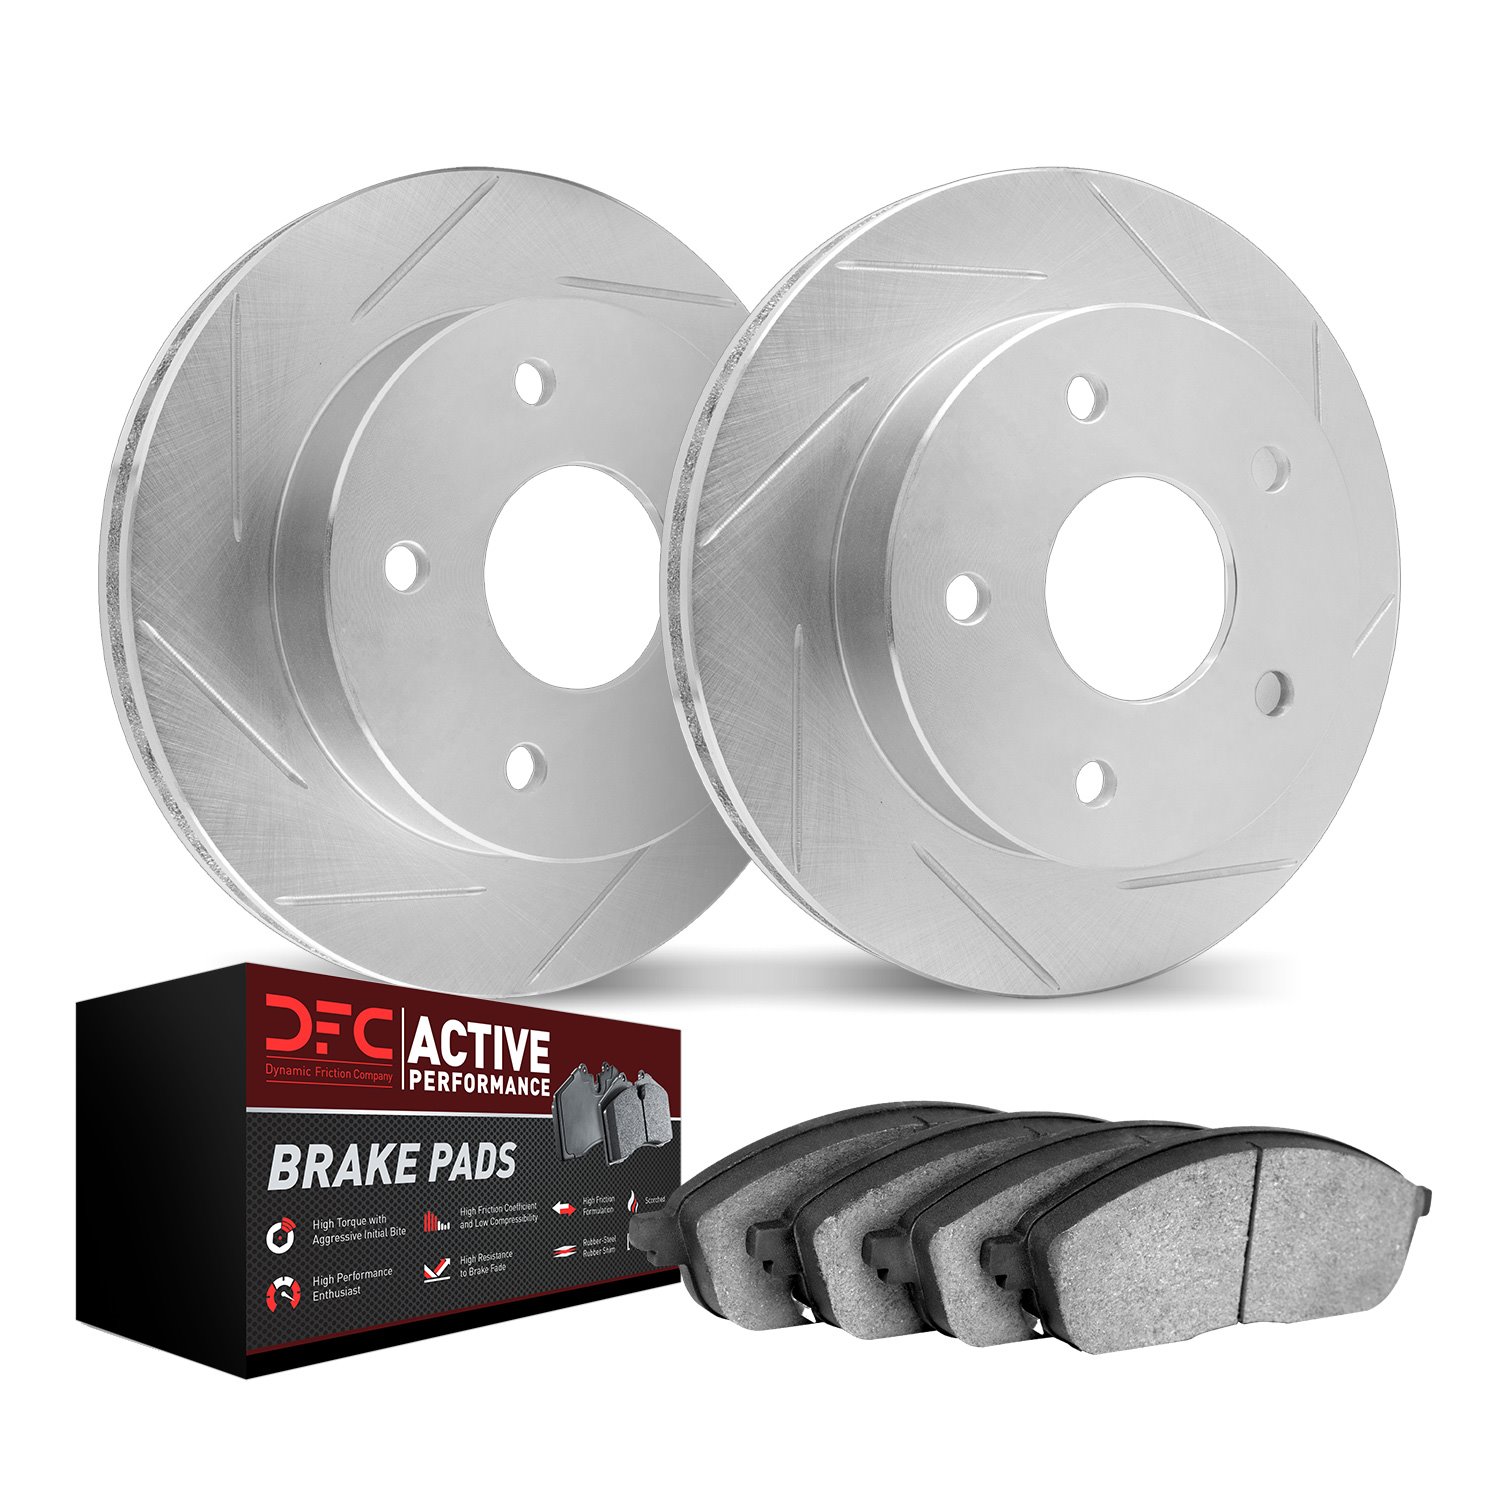 2702-20011 Geoperformance Slotted Brake Rotors with Active Performance Pads Kits, 2006-2019 Jaguar, Position: Front